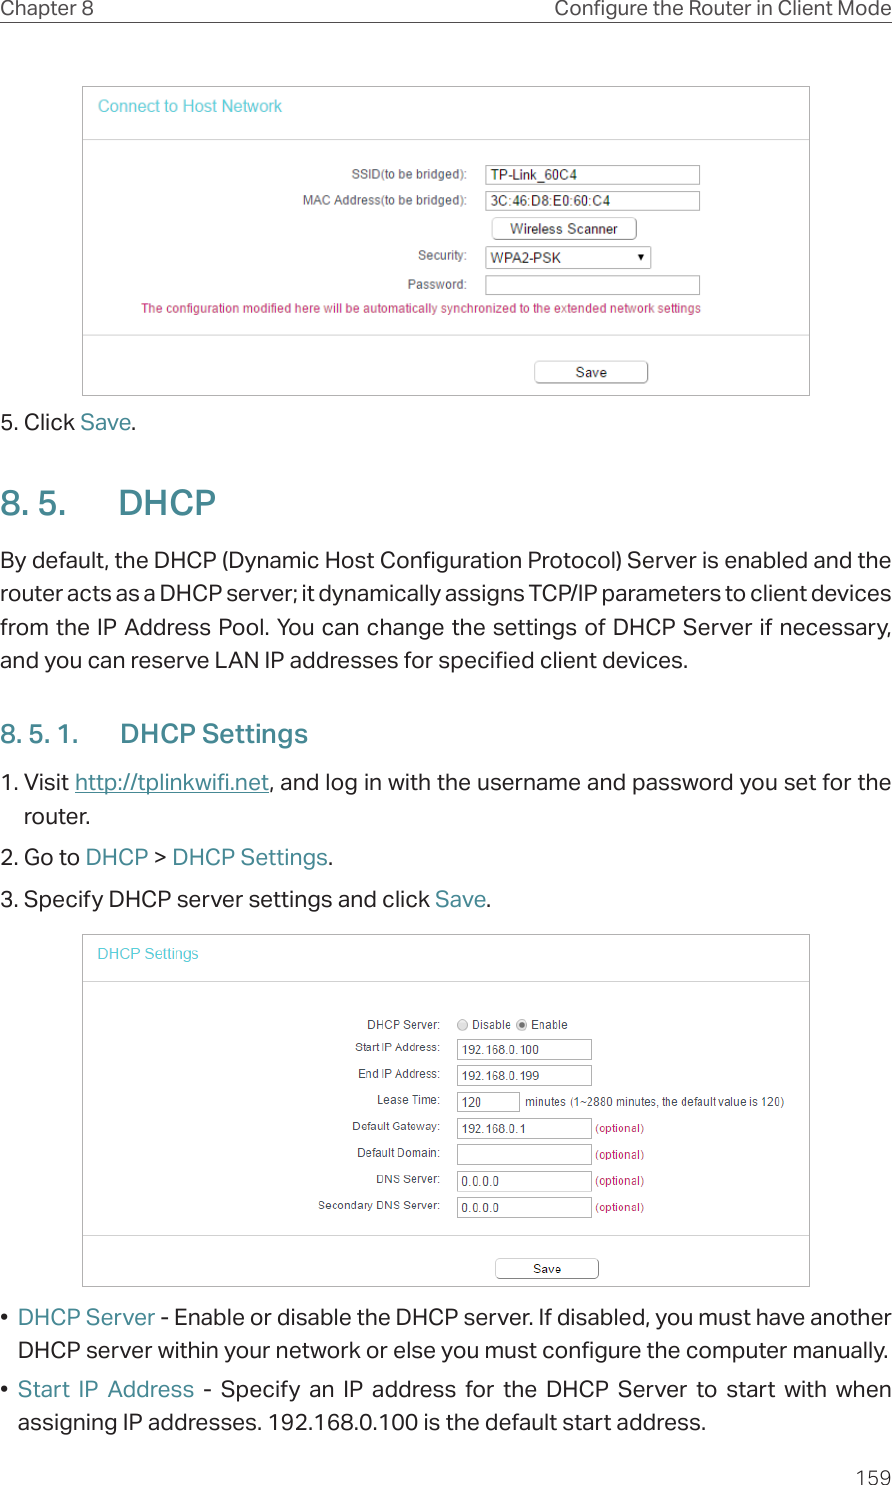 159Chapter 8 Congure the Router in Client Mode5. Click Save.8. 5.  DHCPBy default, the DHCP (Dynamic Host Configuration Protocol) Server is enabled and the router acts as a DHCP server; it dynamically assigns TCP/IP parameters to client devices from the IP Address Pool. You can change the settings of DHCP Server if necessary, and you can reserve LAN IP addresses for specified client devices.8. 5. 1.  DHCP Settings1. Visit http://tplinkwifi.net, and log in with the username and password you set for the router.2. Go to DHCP &gt; DHCP Settings. 3. Specify DHCP server settings and click Save.•  DHCP Server - Enable or disable the DHCP server. If disabled, you must have another DHCP server within your network or else you must configure the computer manually.•  Start IP Address - Specify an IP address for the DHCP Server to start with when assigning IP addresses. 192.168.0.100 is the default start address.